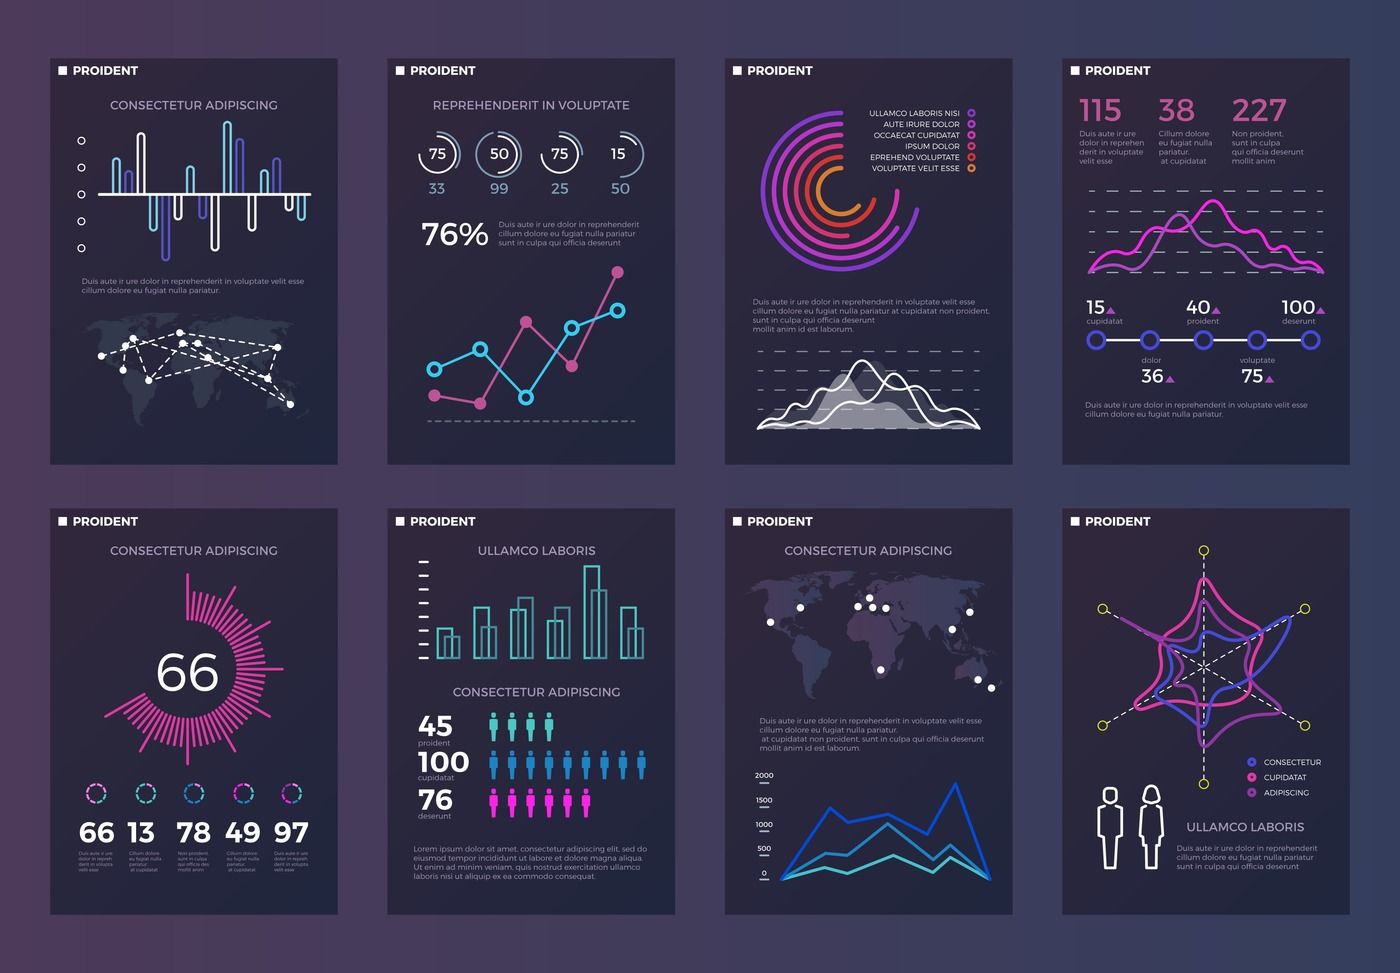 infographics in business reporting